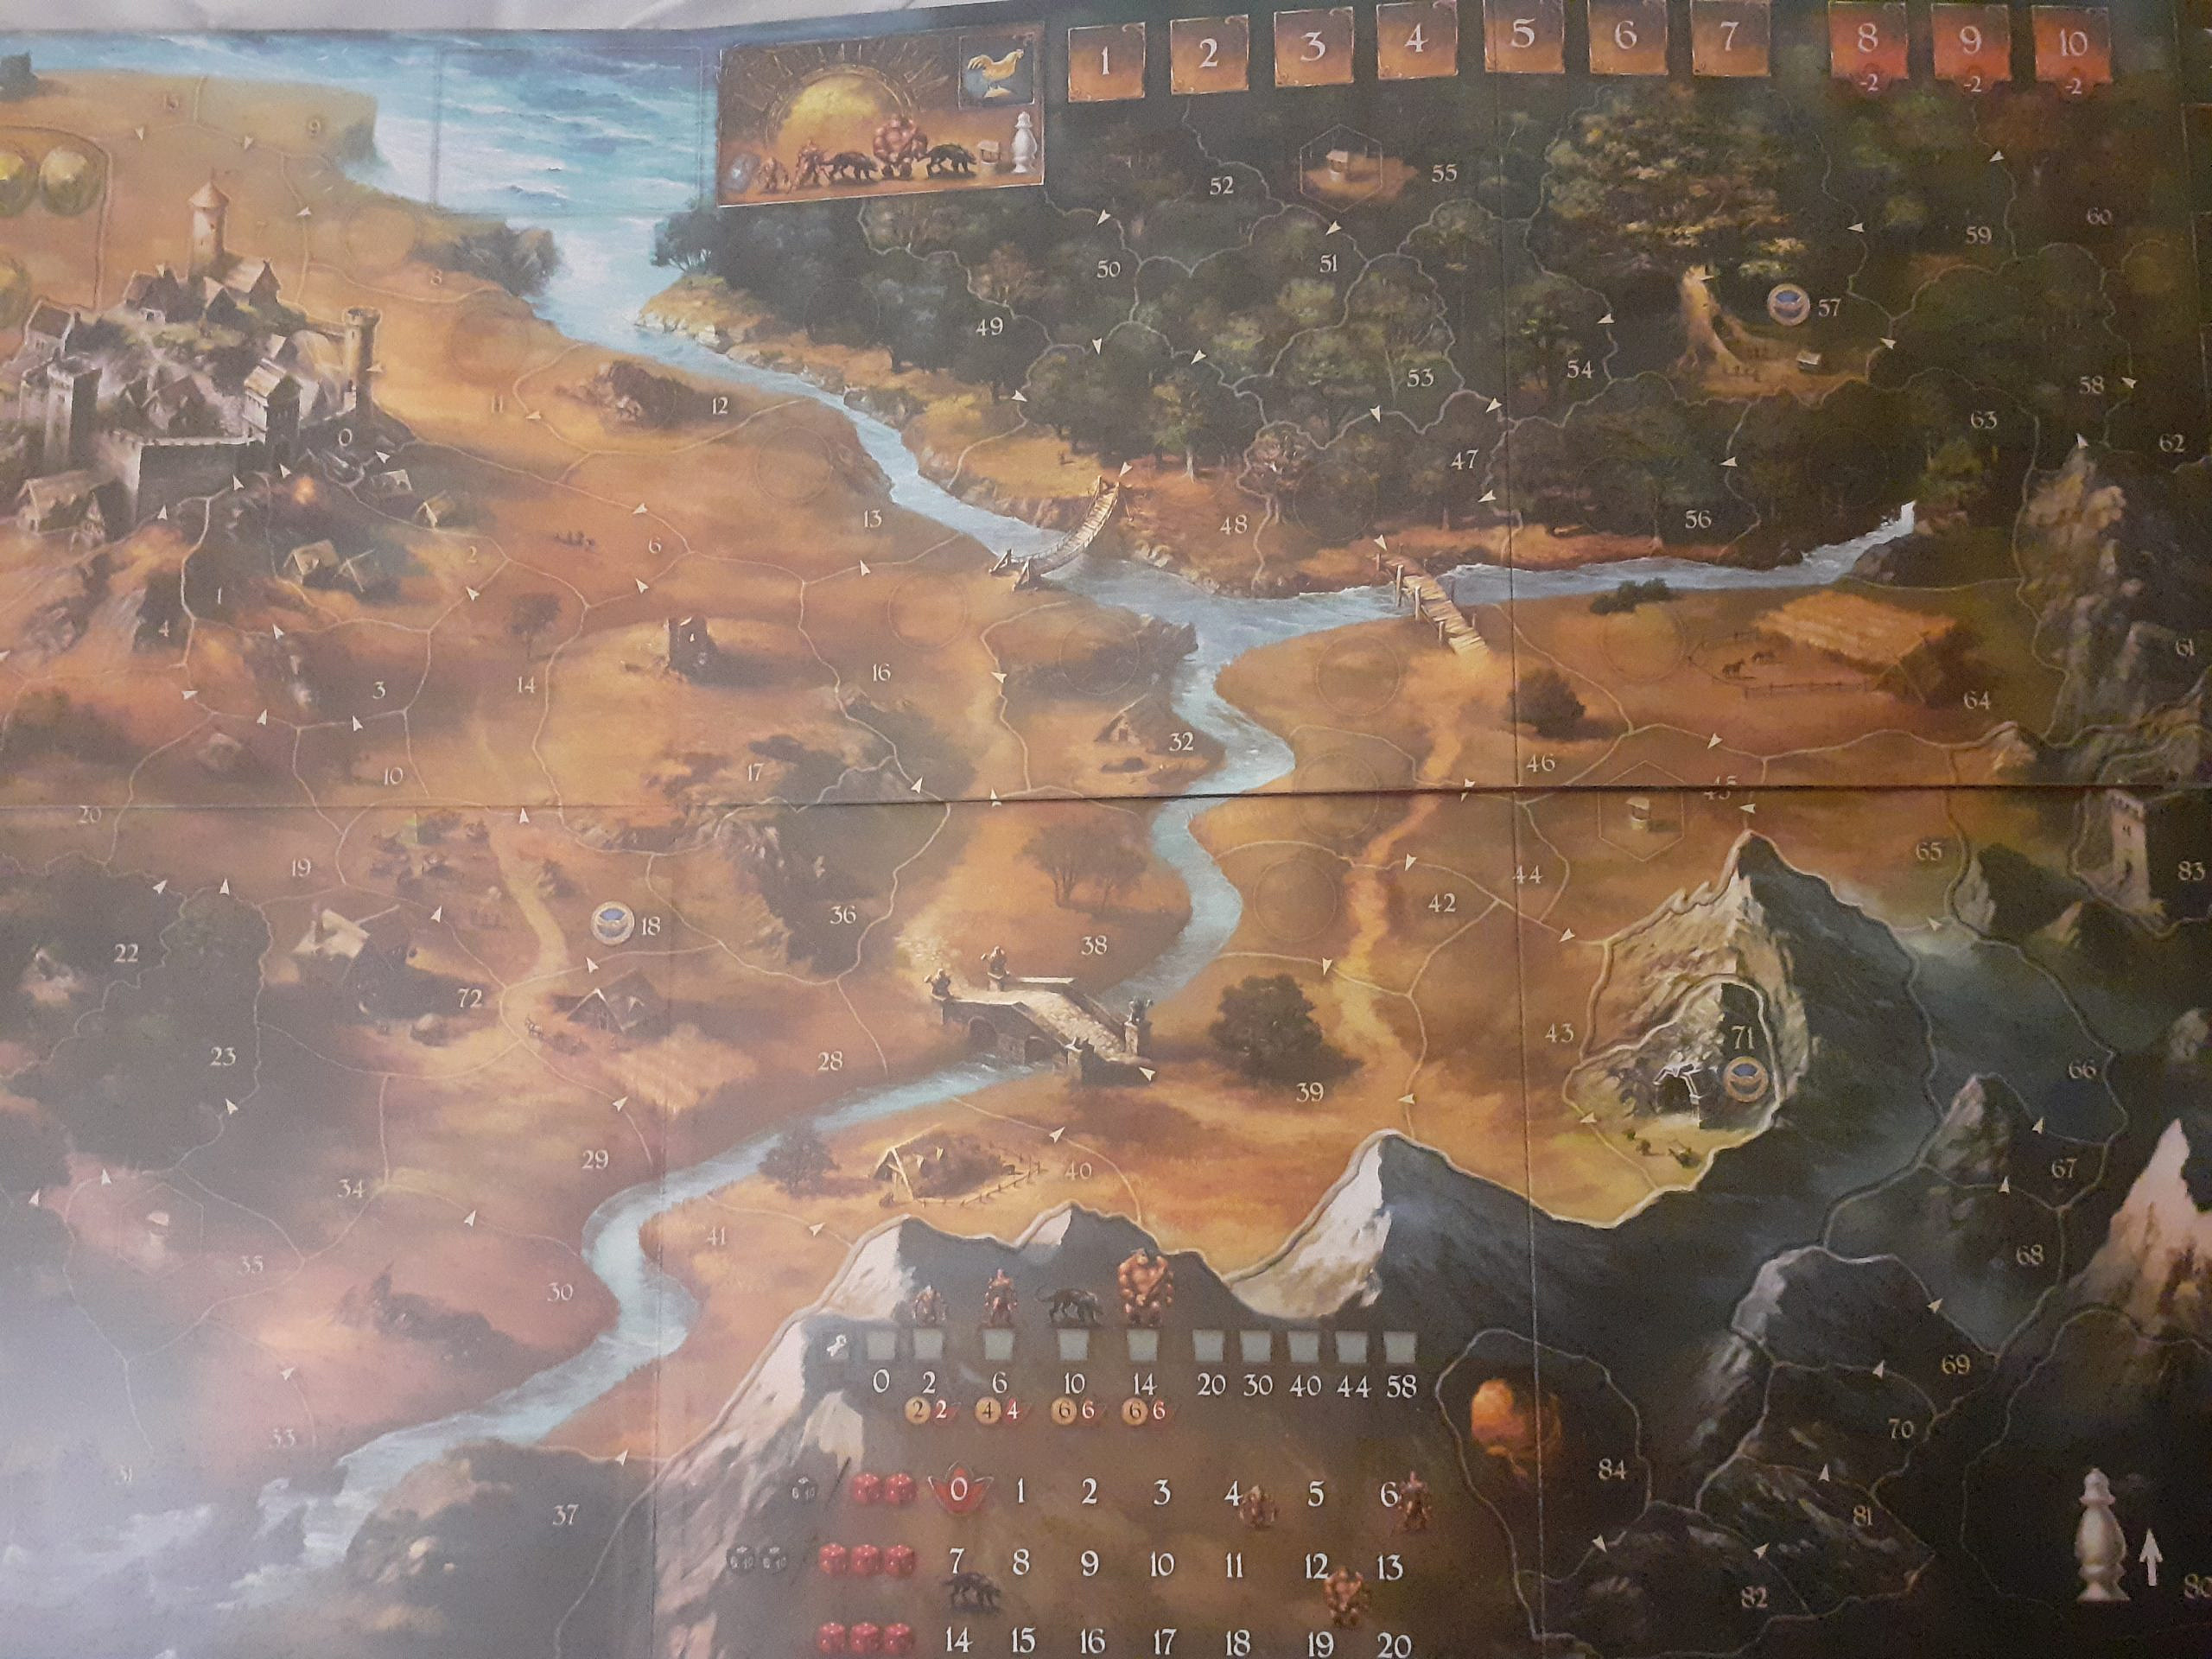 A map in a boardgame called Legends of Andor 